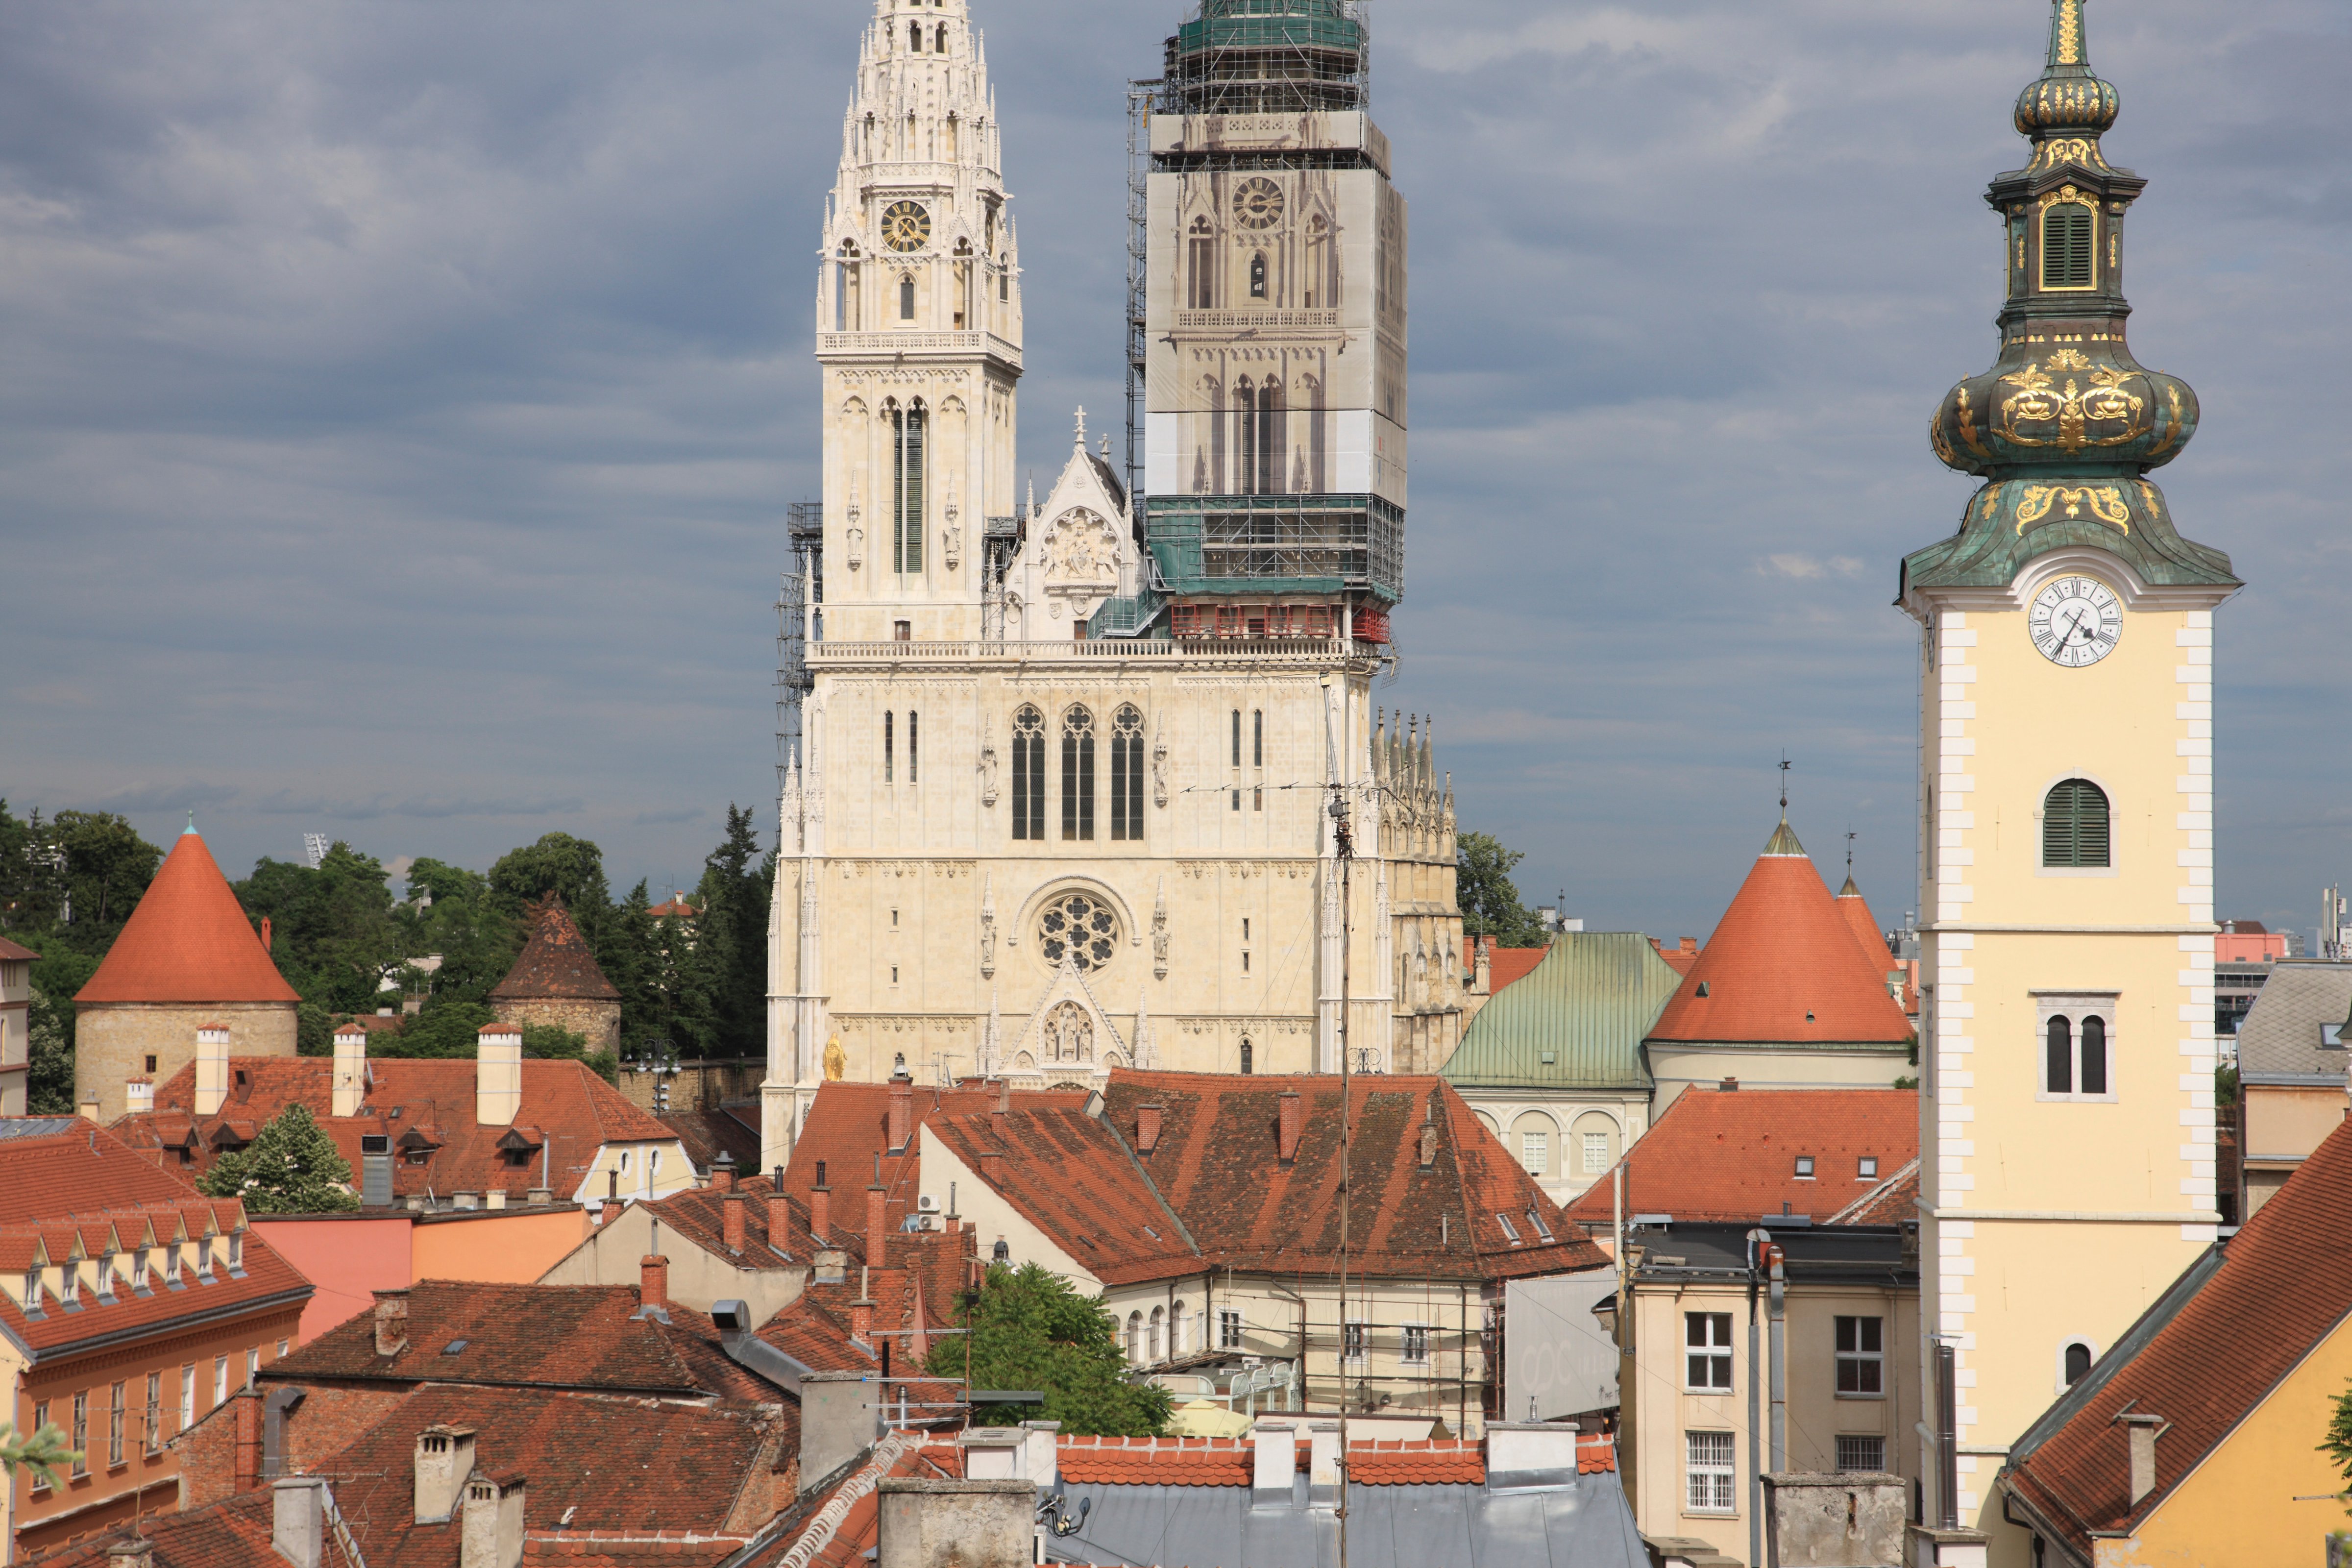 Croatia, Zagreb, View of Zagreb Cathedral and houses (Photo by: JTB Photo/UIG via Getty Images) (JTB Photo—UIG via Getty Images)